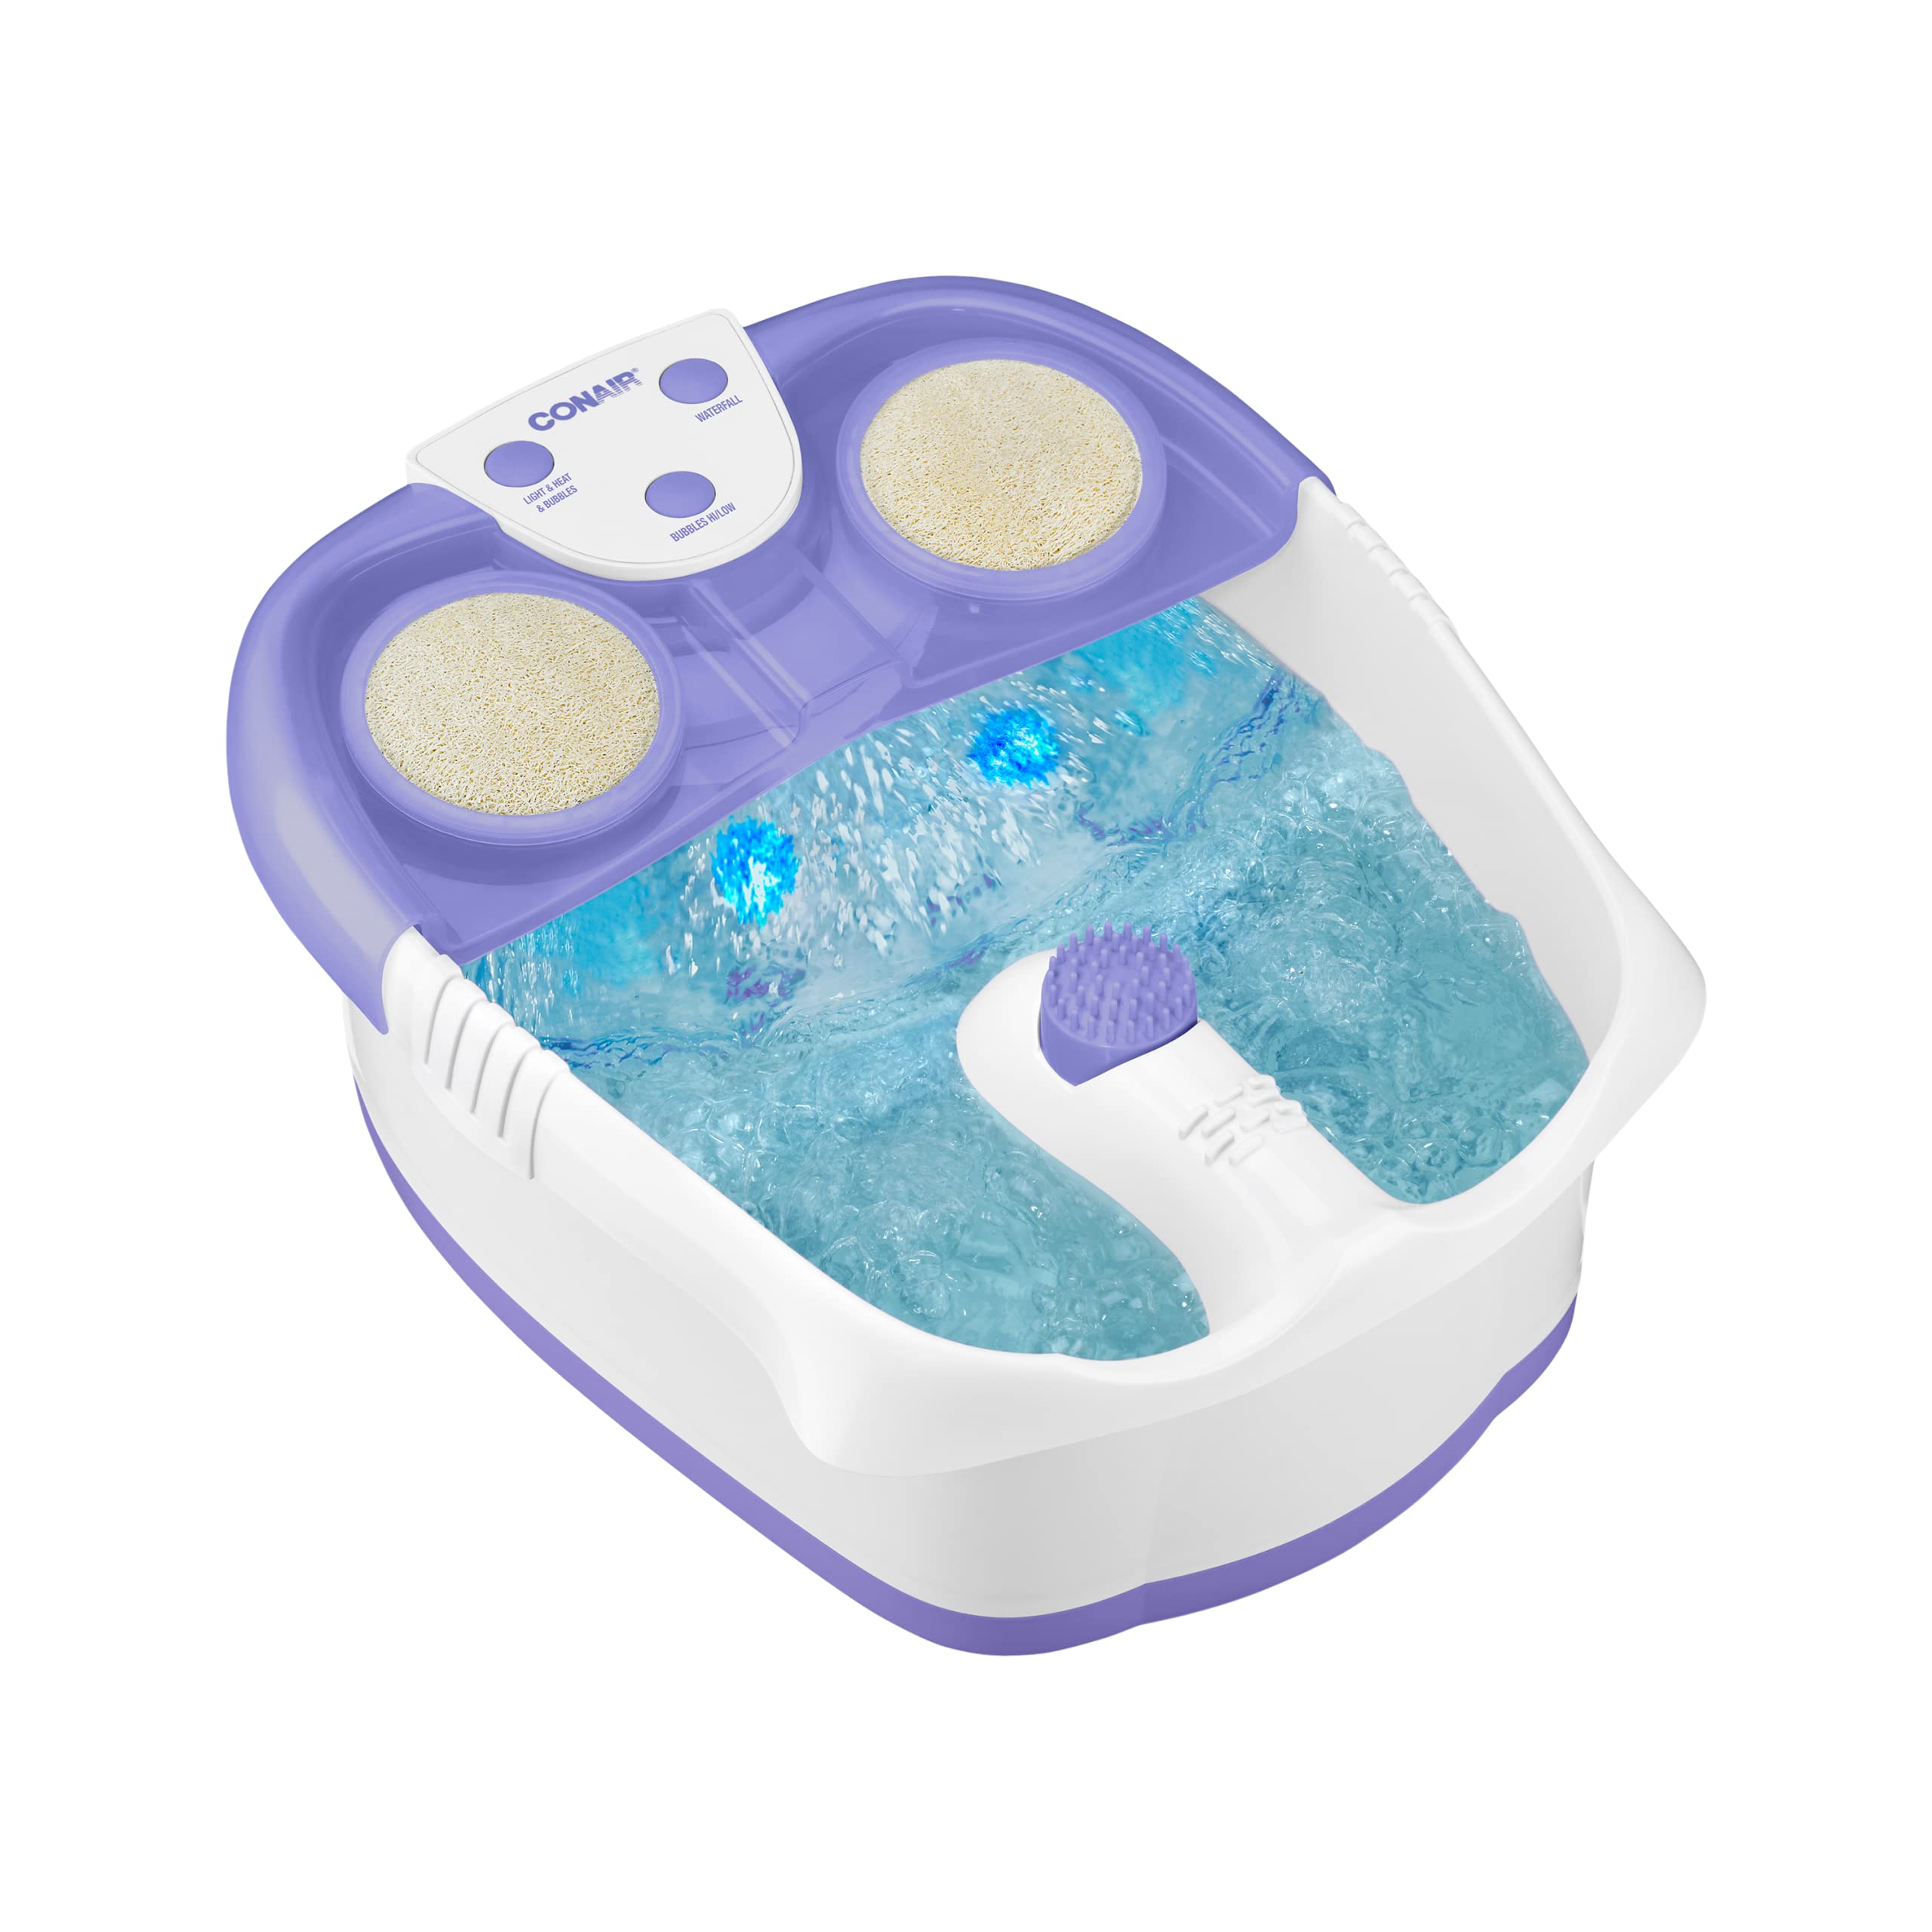 Conair Waterfall Pedicure Foot Spa Bath with Blue LED Lights with Bubbles and Rollers, Purple/White